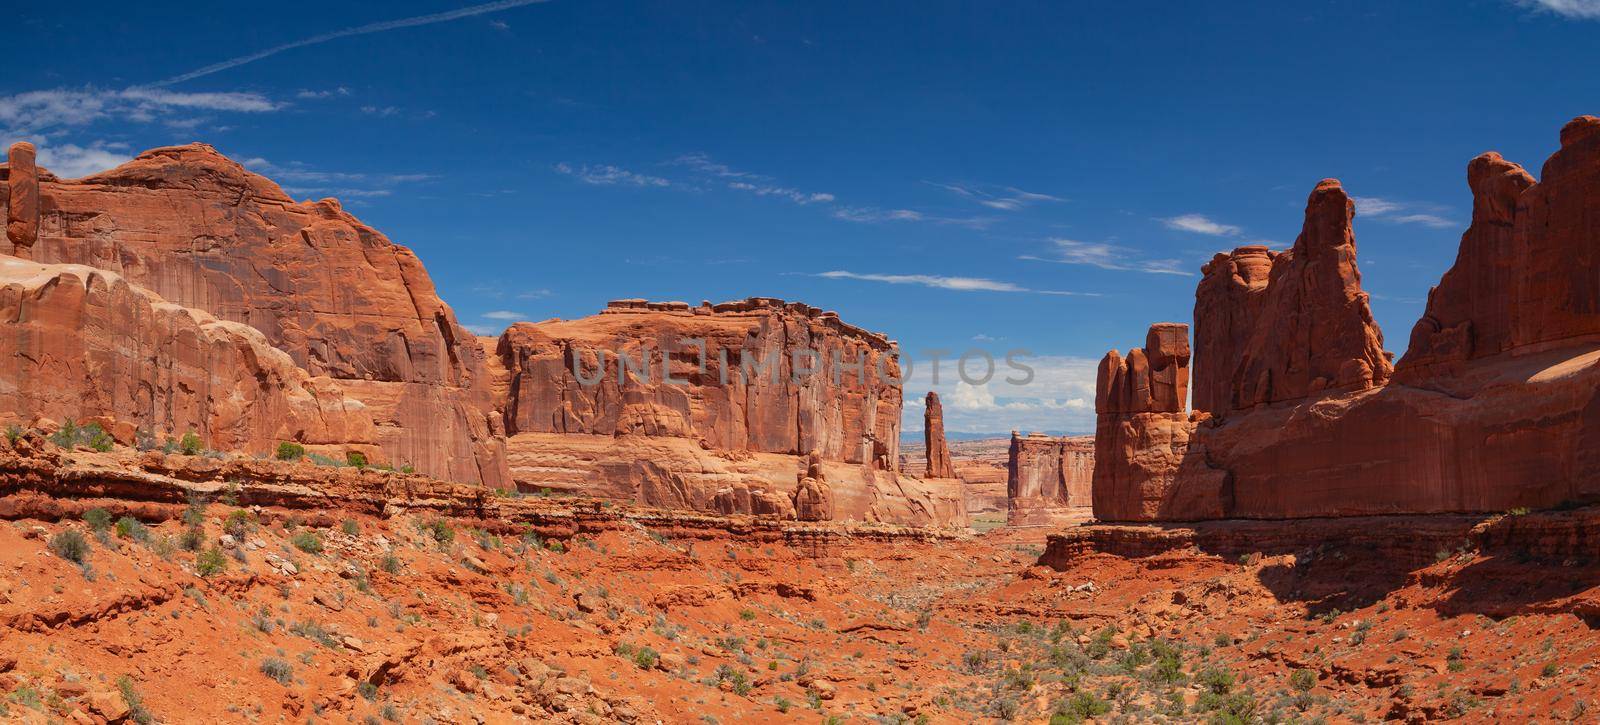 Arches National Park, Moab,Utah,USA.  Bordered by the Colorado River in the southeast, it is known as the site of more than 2,000 natural sandstone arches.